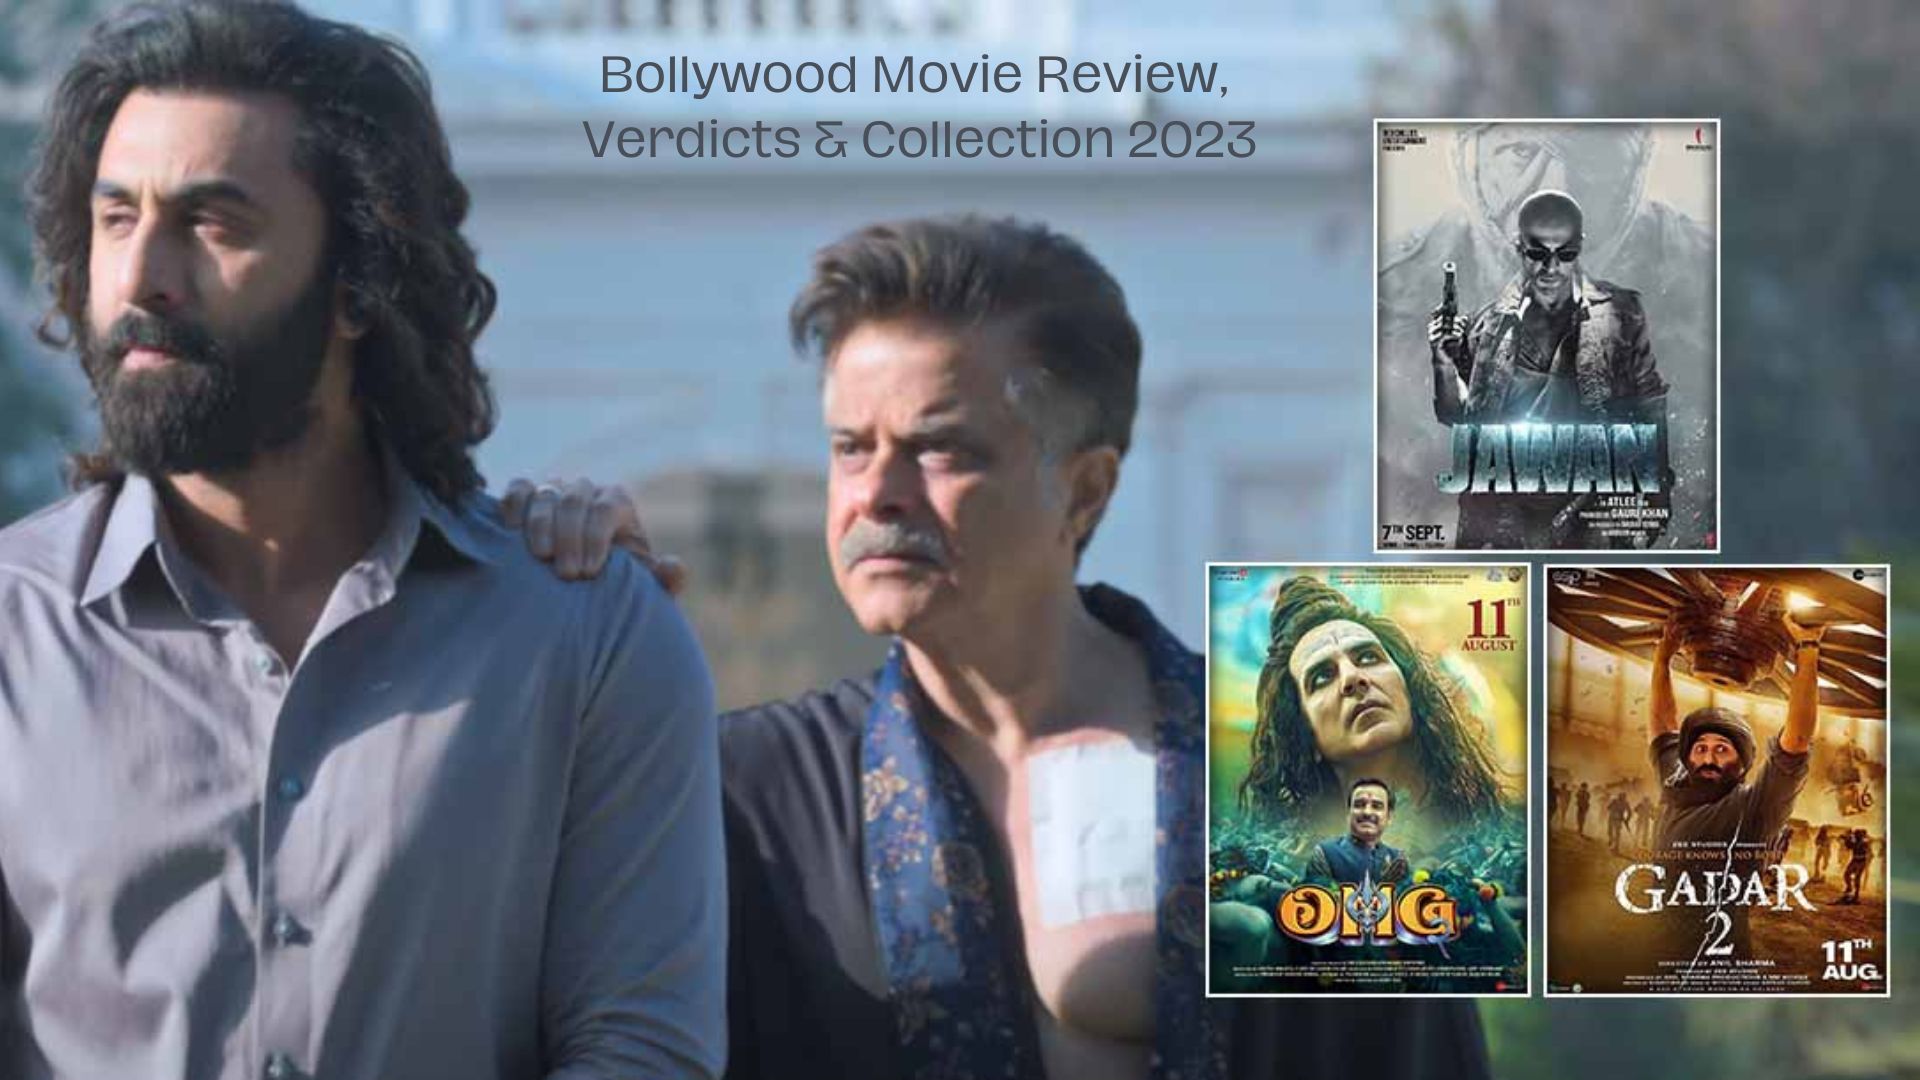 Indian Box Office Review, Verdicts & Collection 2023